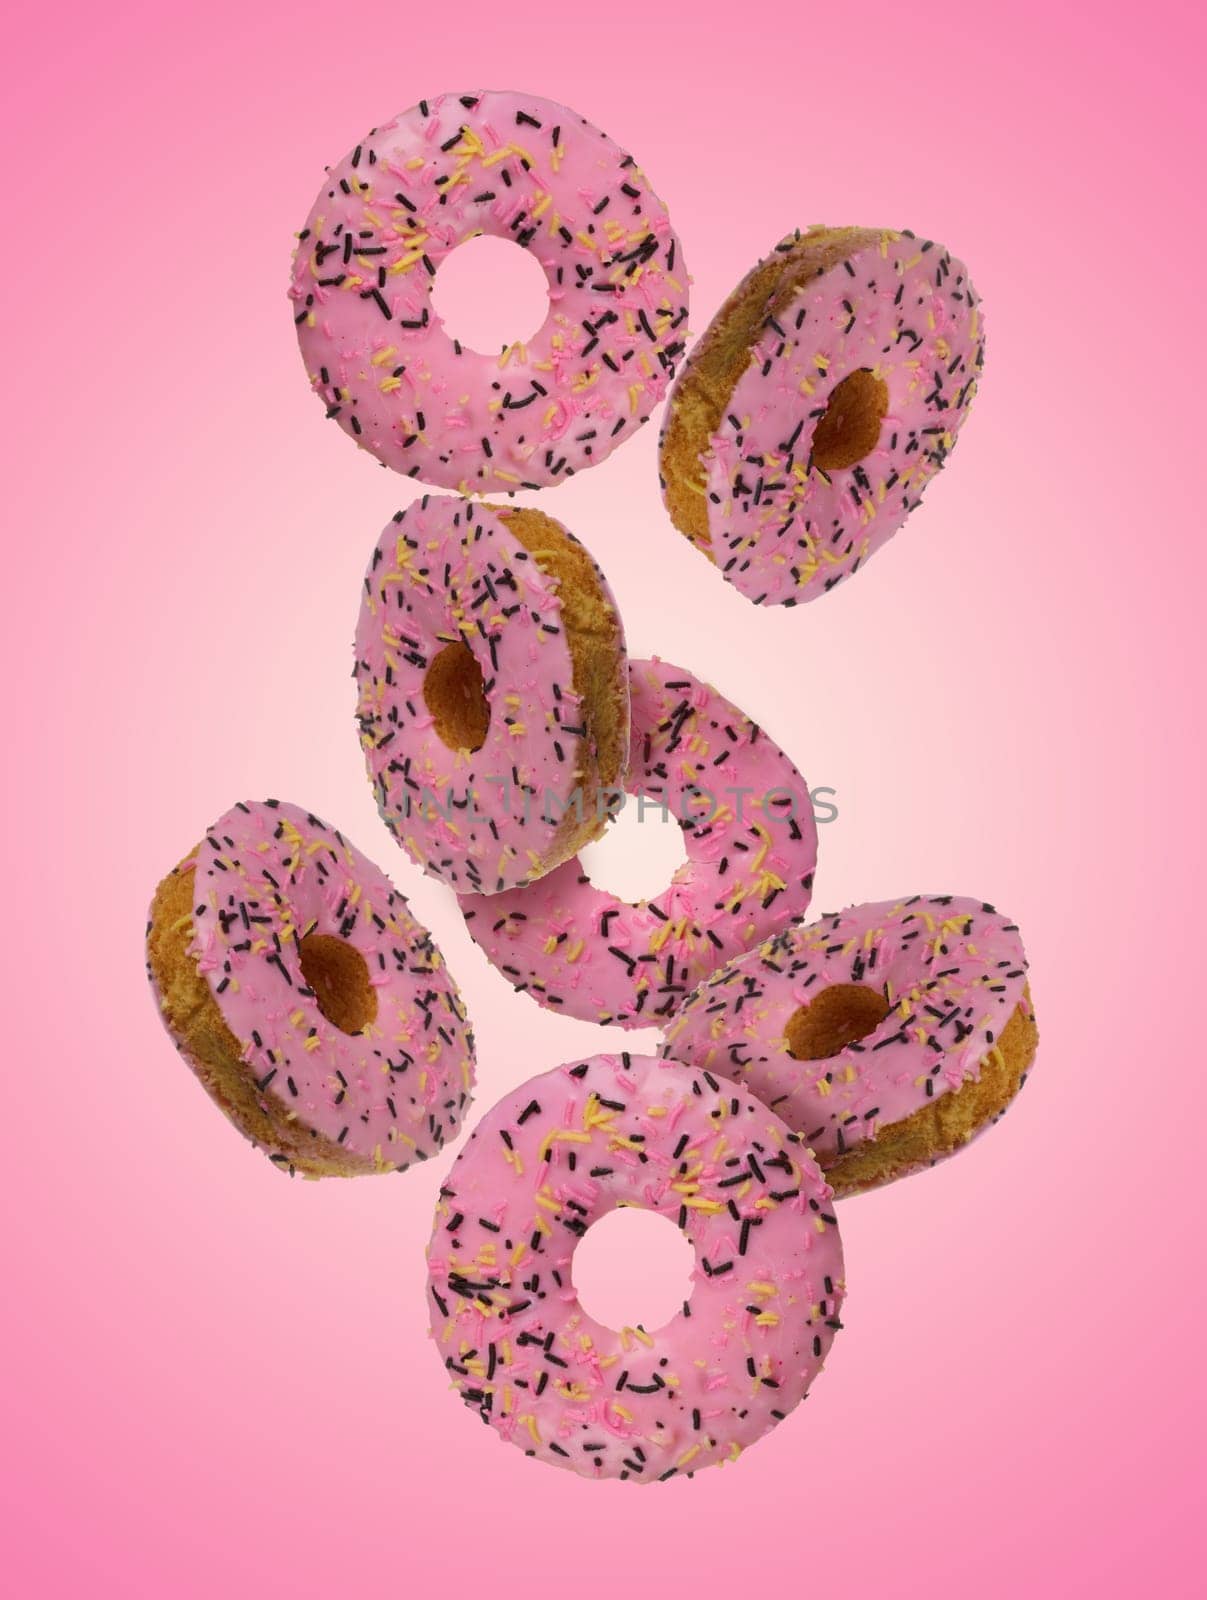 Donuts with pink glaze and sprinkled with colorful sprinkles levitate on a pink background